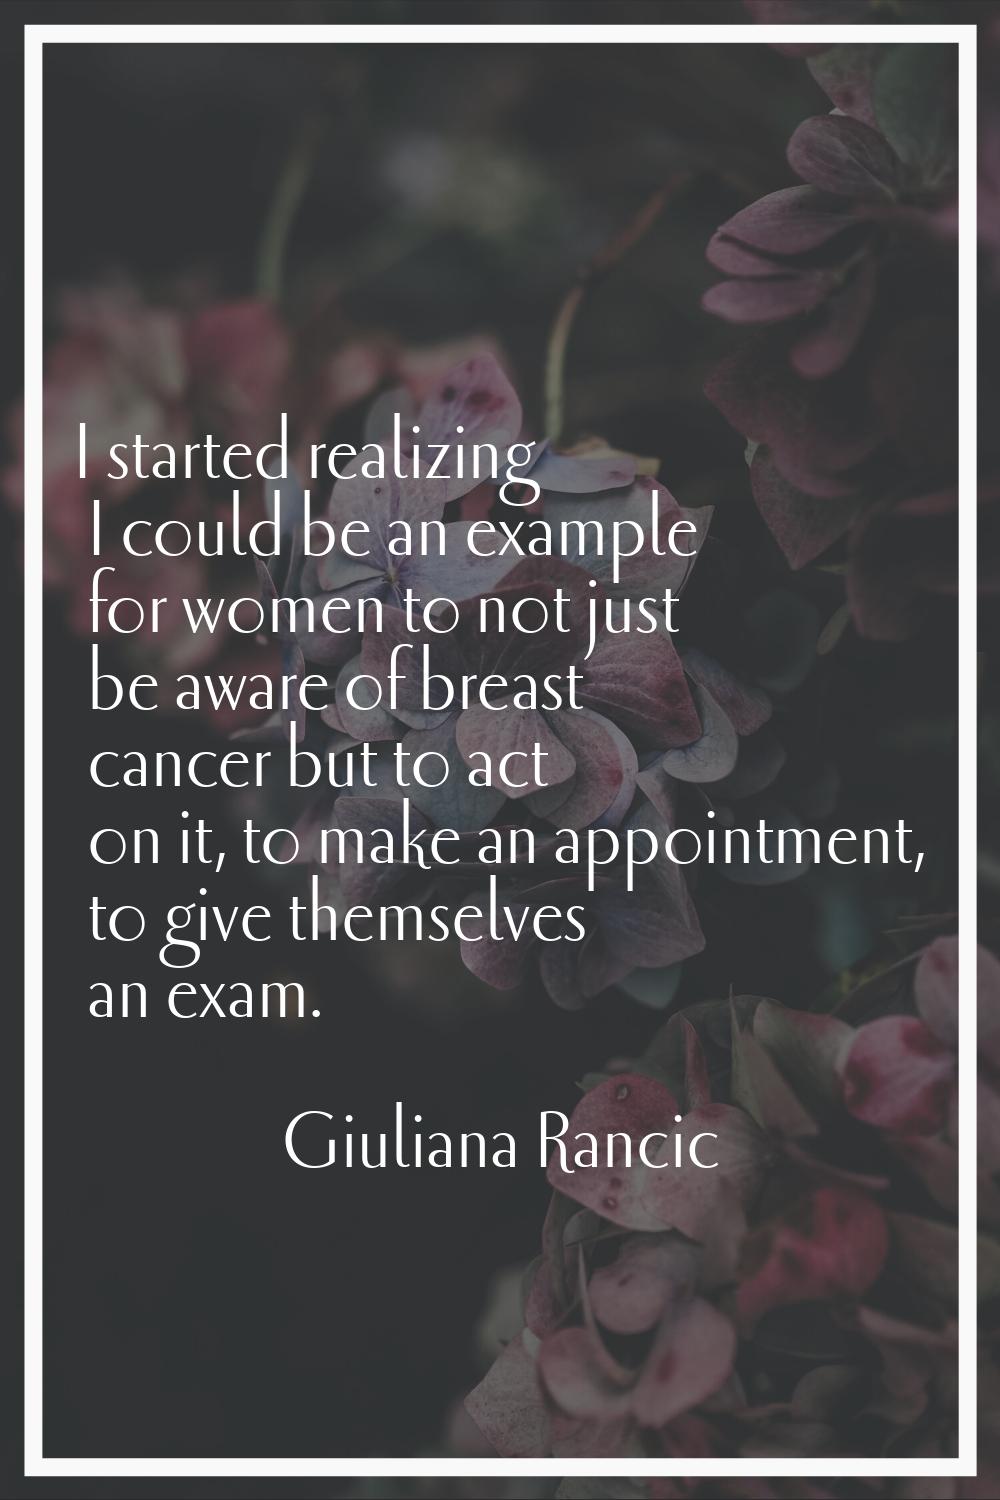 I started realizing I could be an example for women to not just be aware of breast cancer but to ac